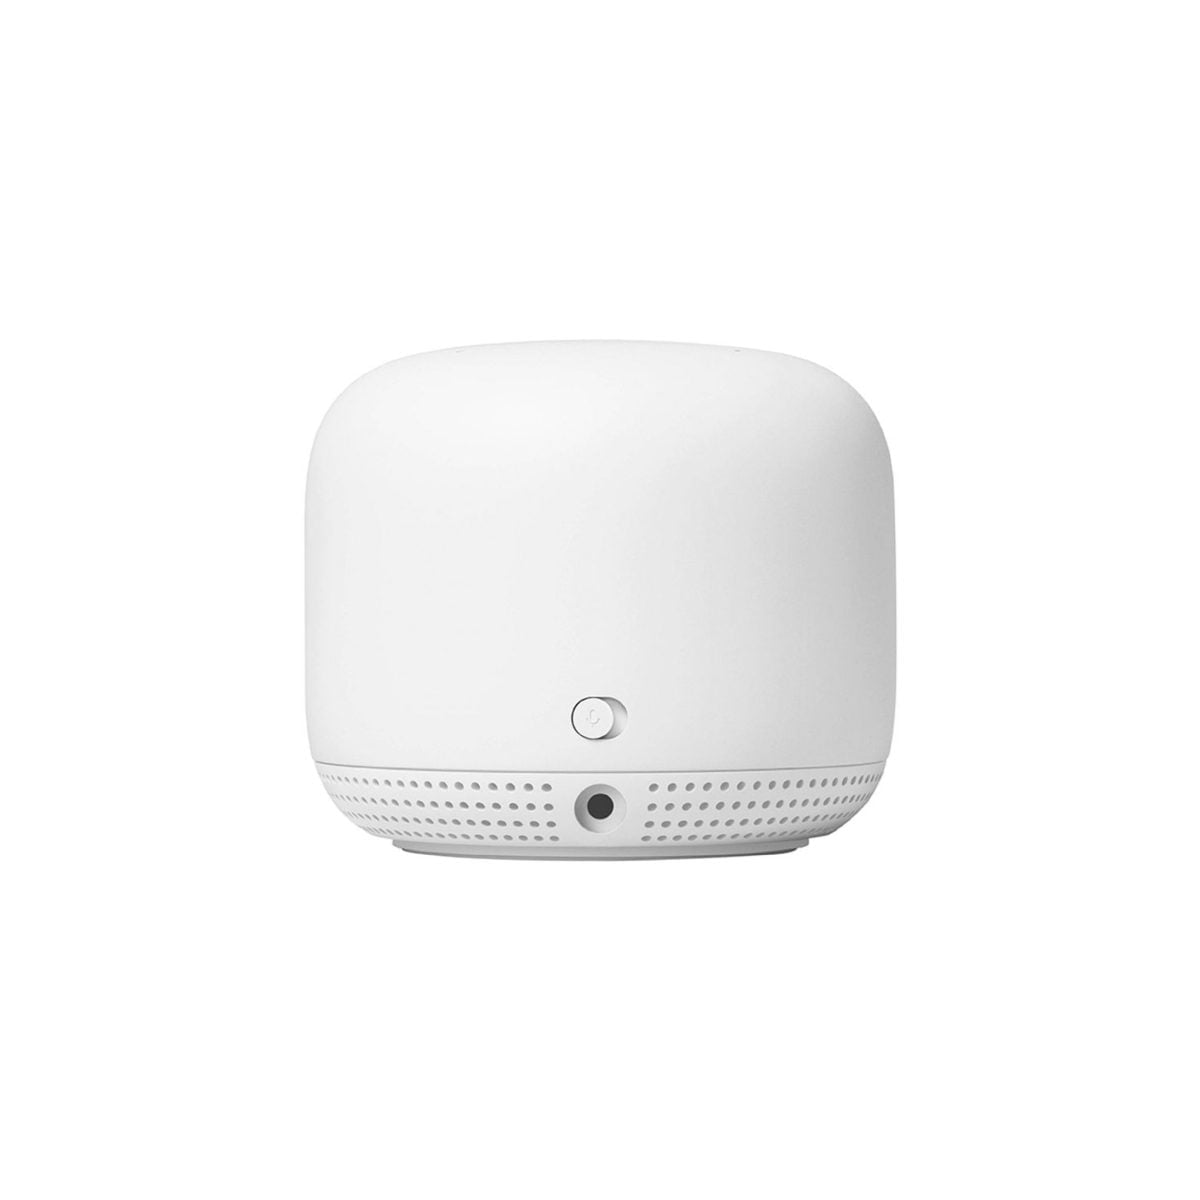 Dsd2212 06 Scaled Google Https://Youtu.be/Wsduj9Sm78K Google Google Nest Wifi Router And 2 Access Points (2020)